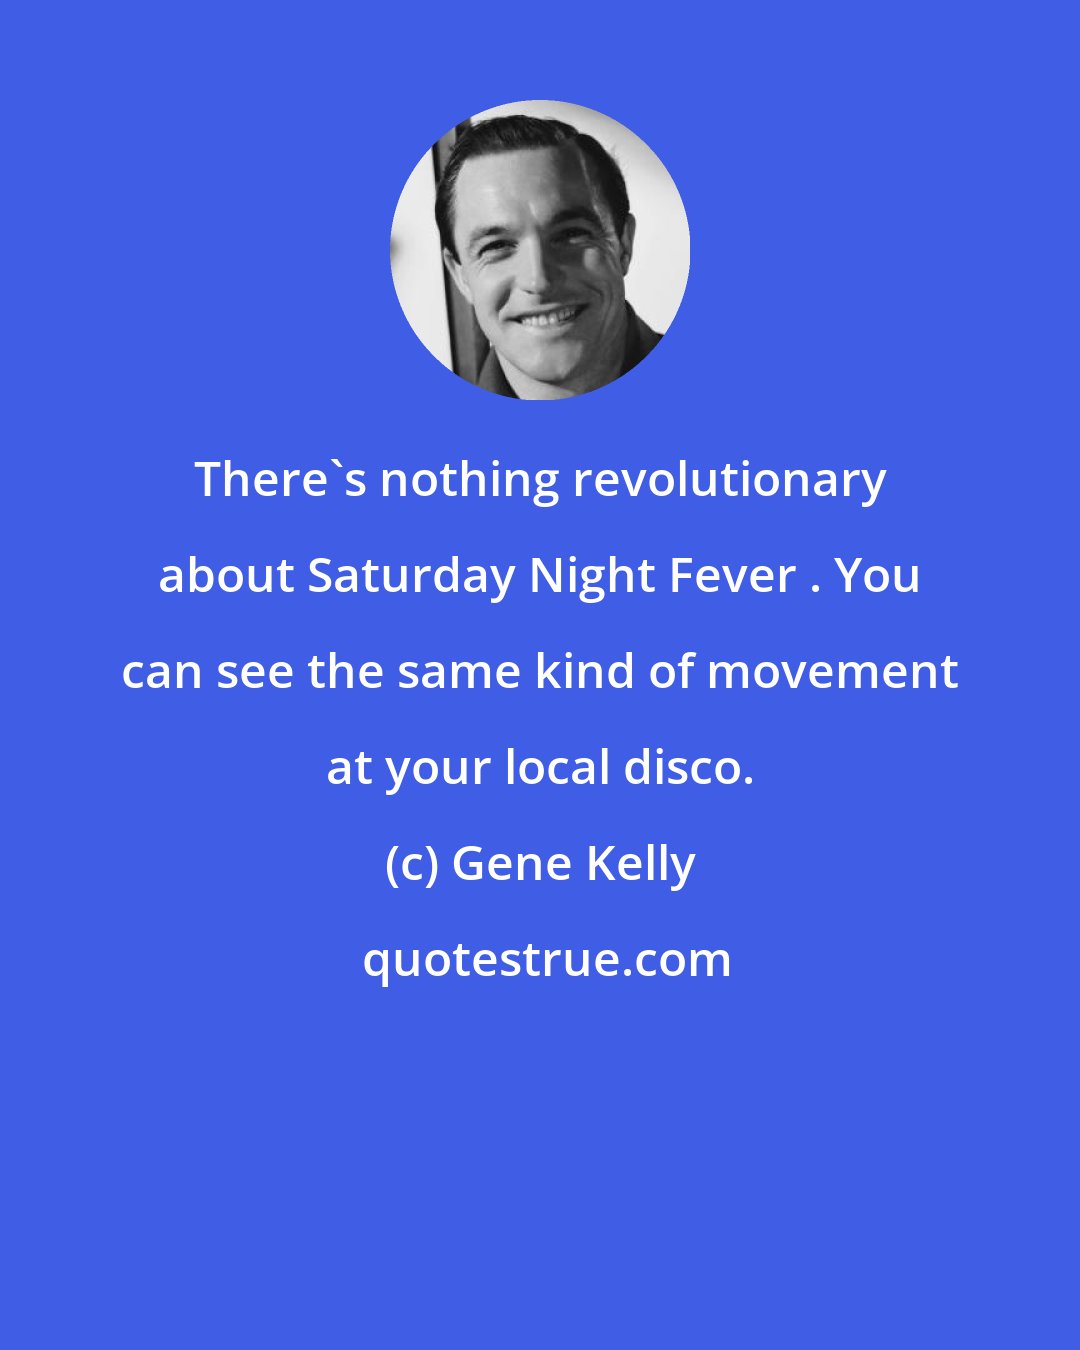 Gene Kelly: There's nothing revolutionary about Saturday Night Fever . You can see the same kind of movement at your local disco.